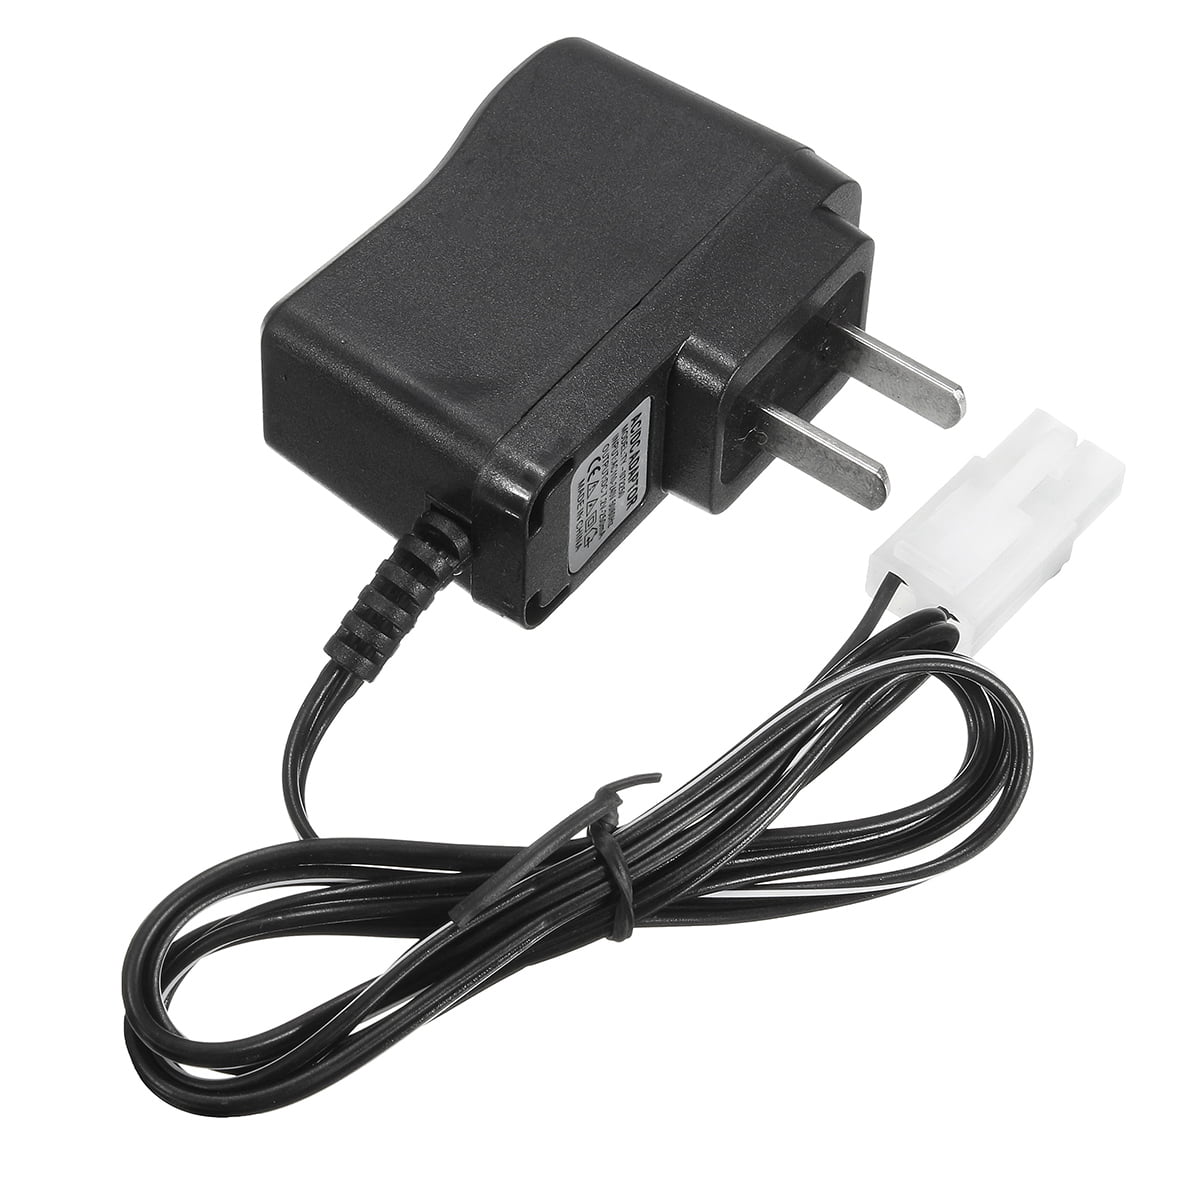 DC 3.6V-7.2V RC Battery Pack Wall Charger Adapter For Remote Control Car XR 